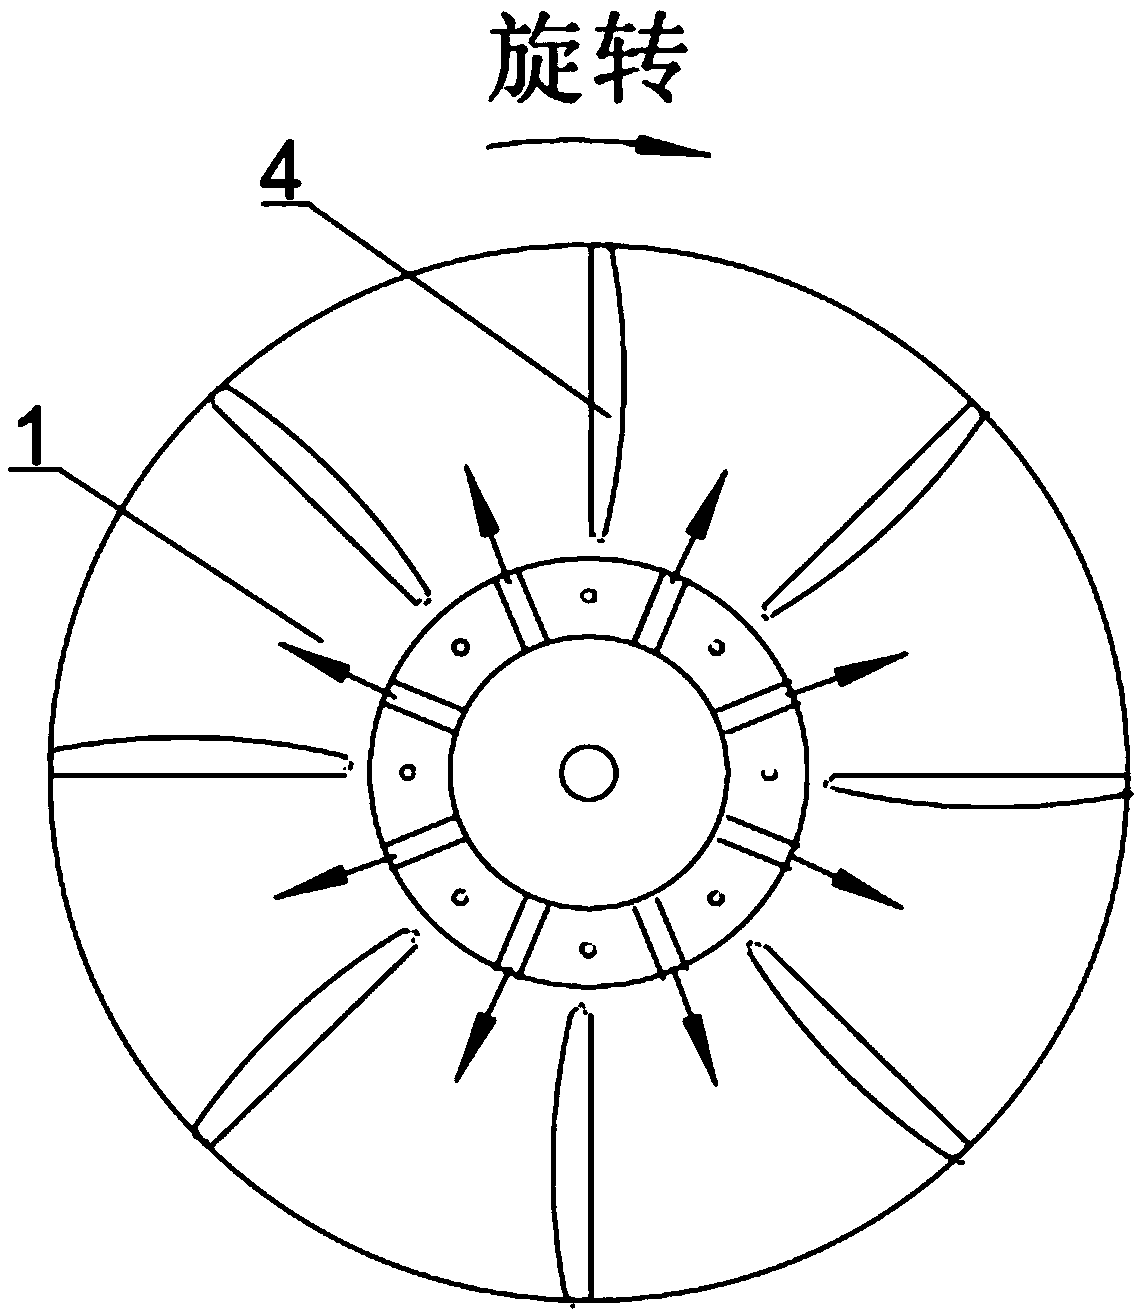 Flotation machine impeller for increasing width of conveying area